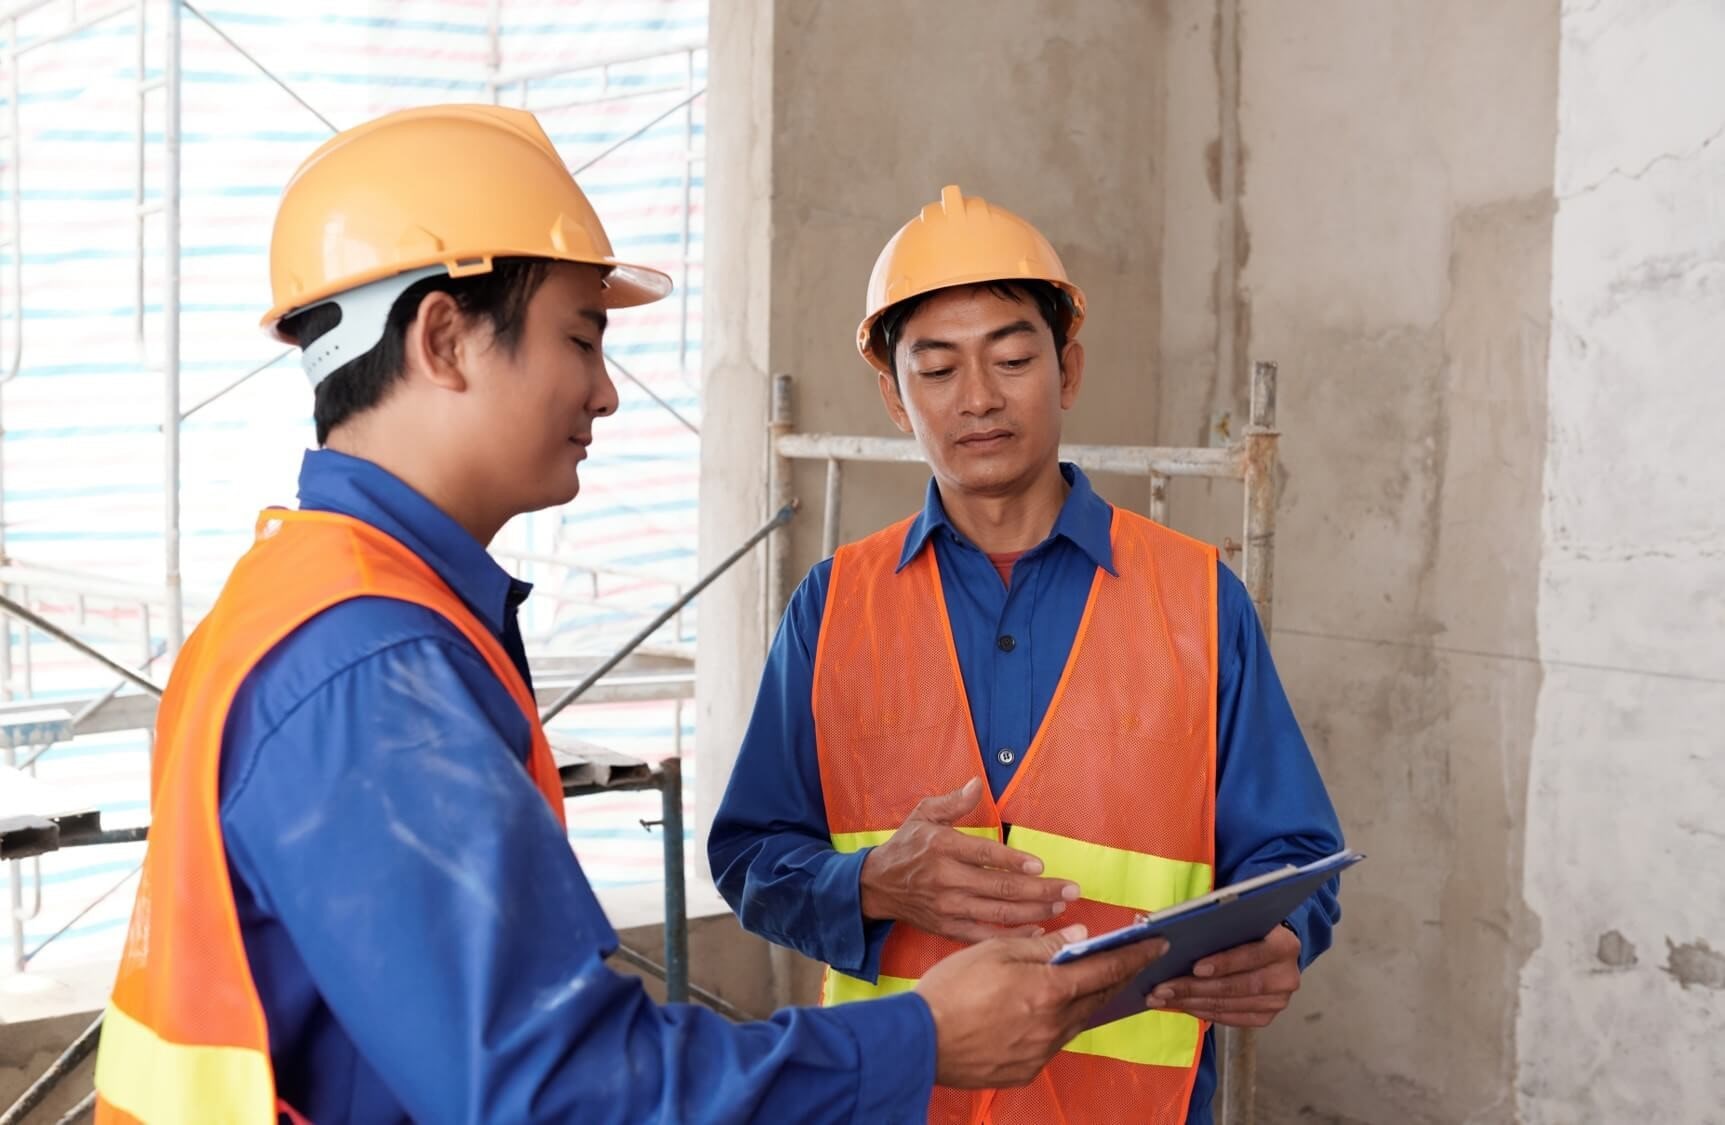 Revolutionise Industry with Construction ERP Systems anh giua bai min - Revolutionise Industry with Construction ERP